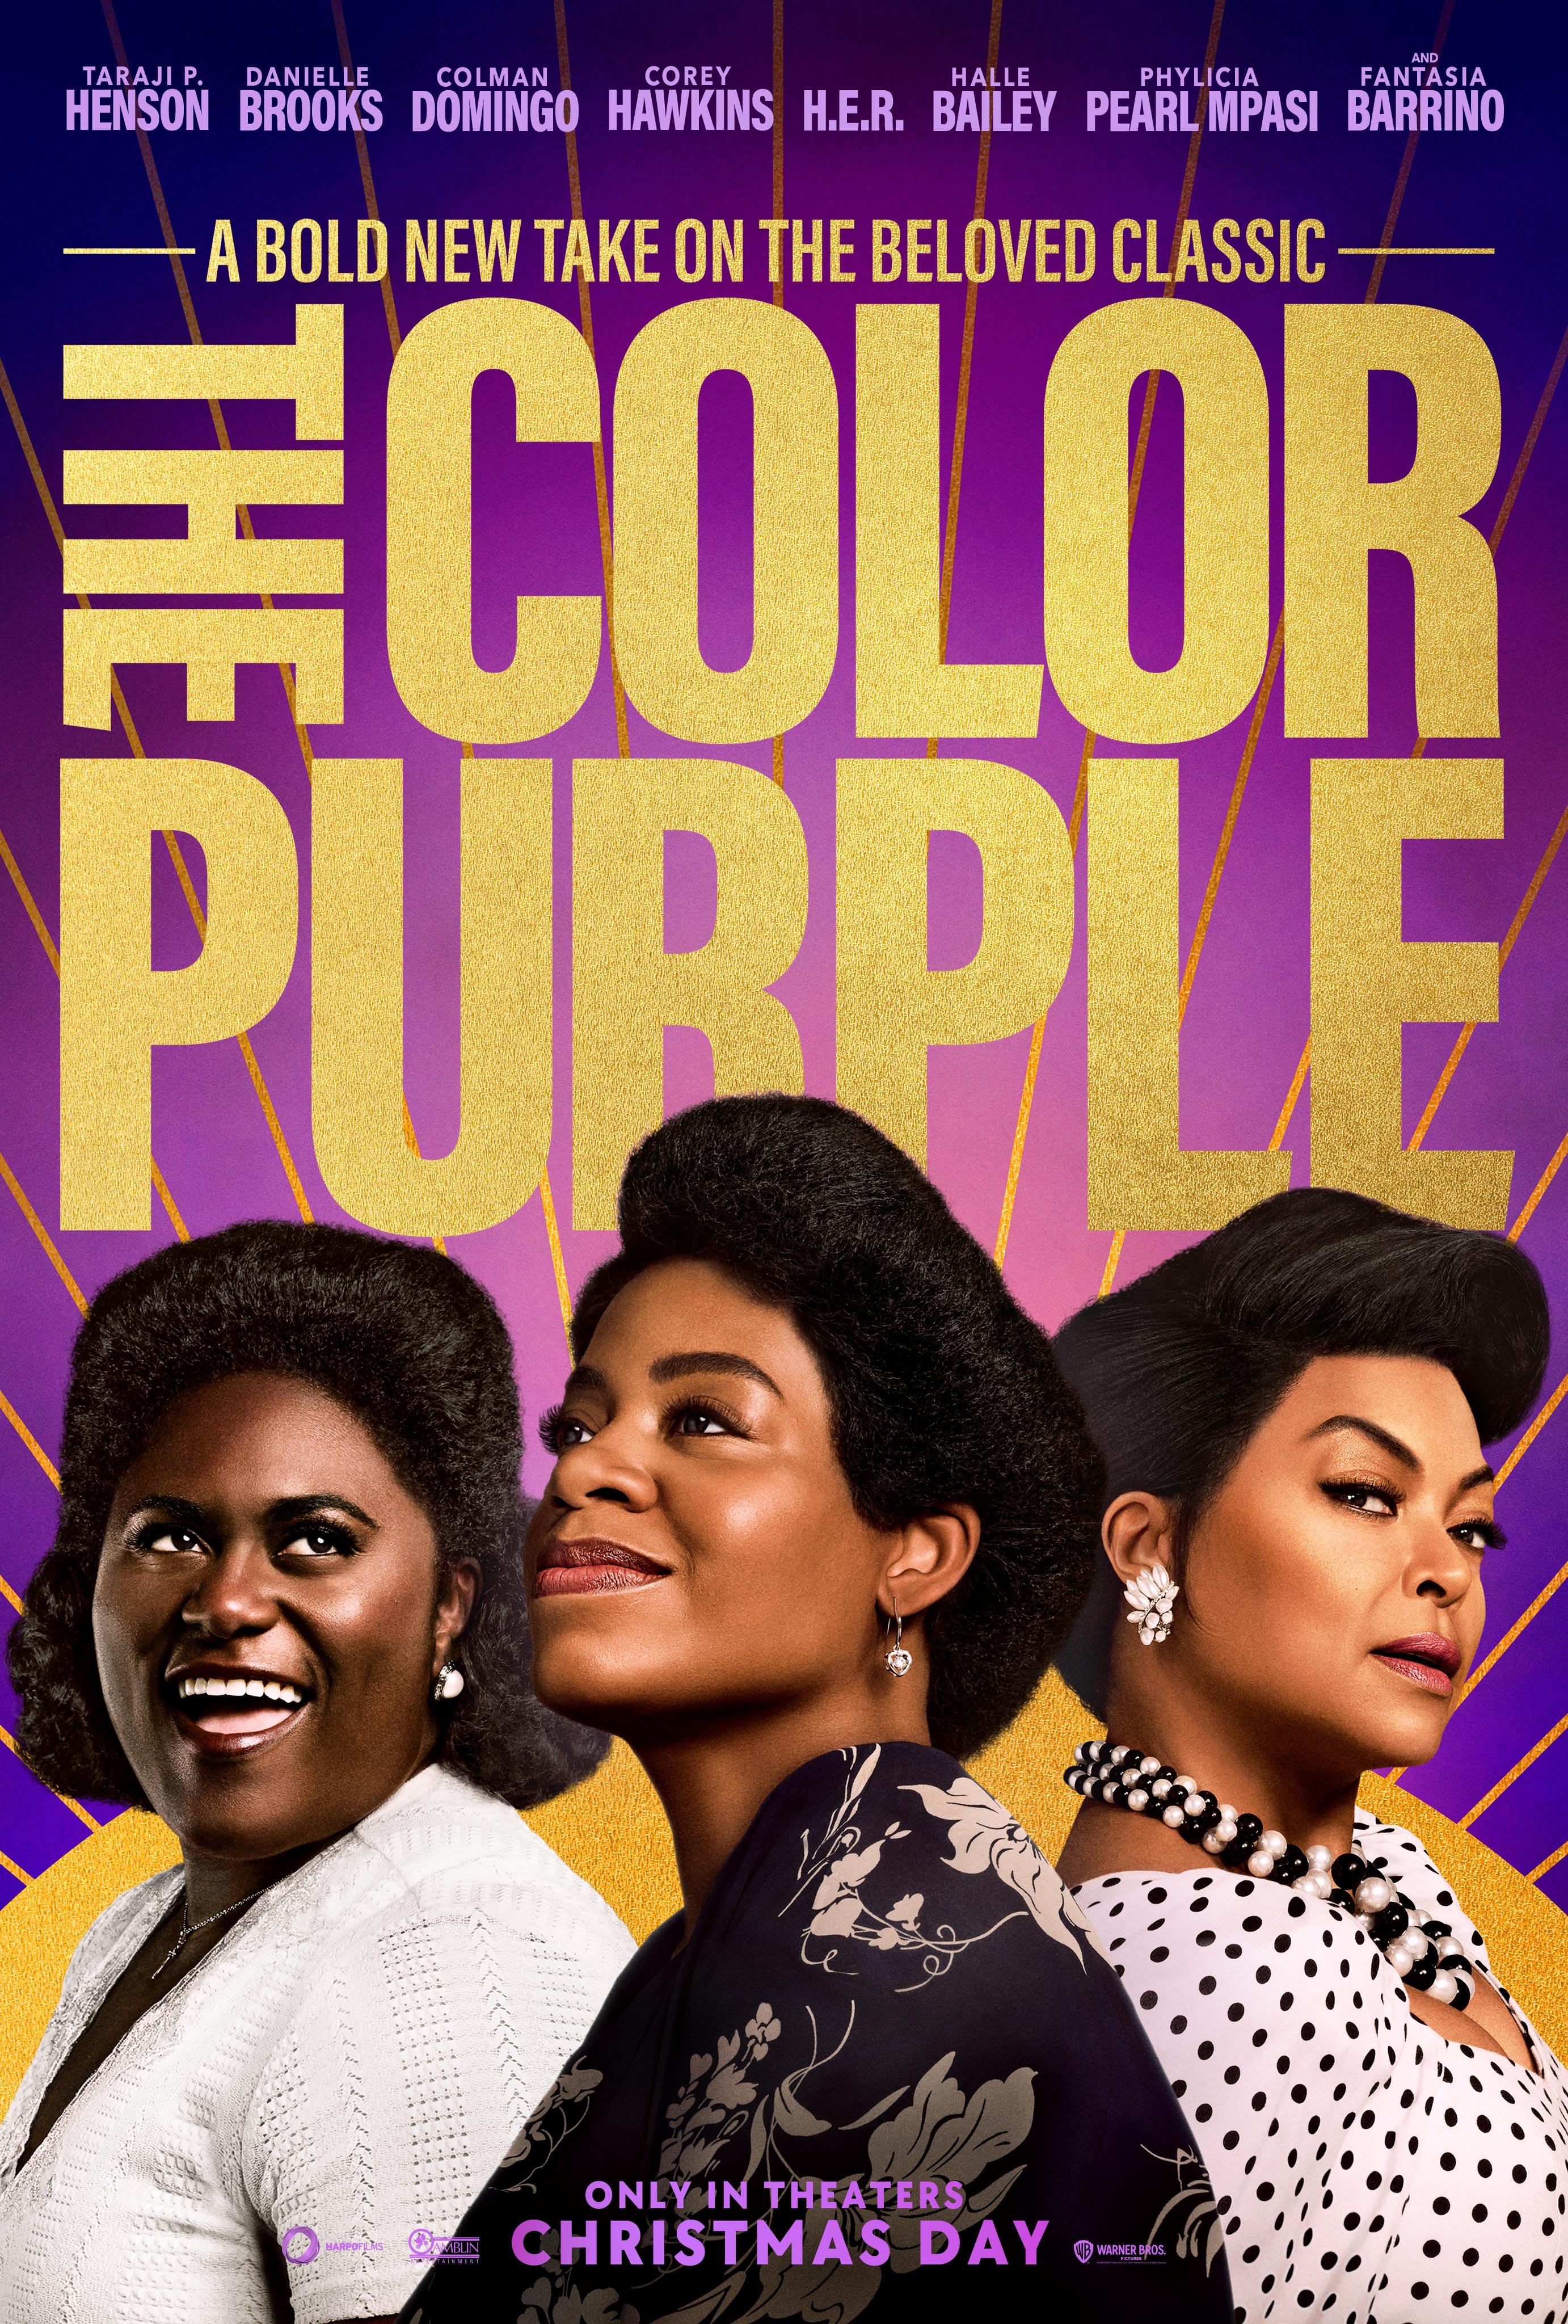 Cover image reading "The Color Purple"